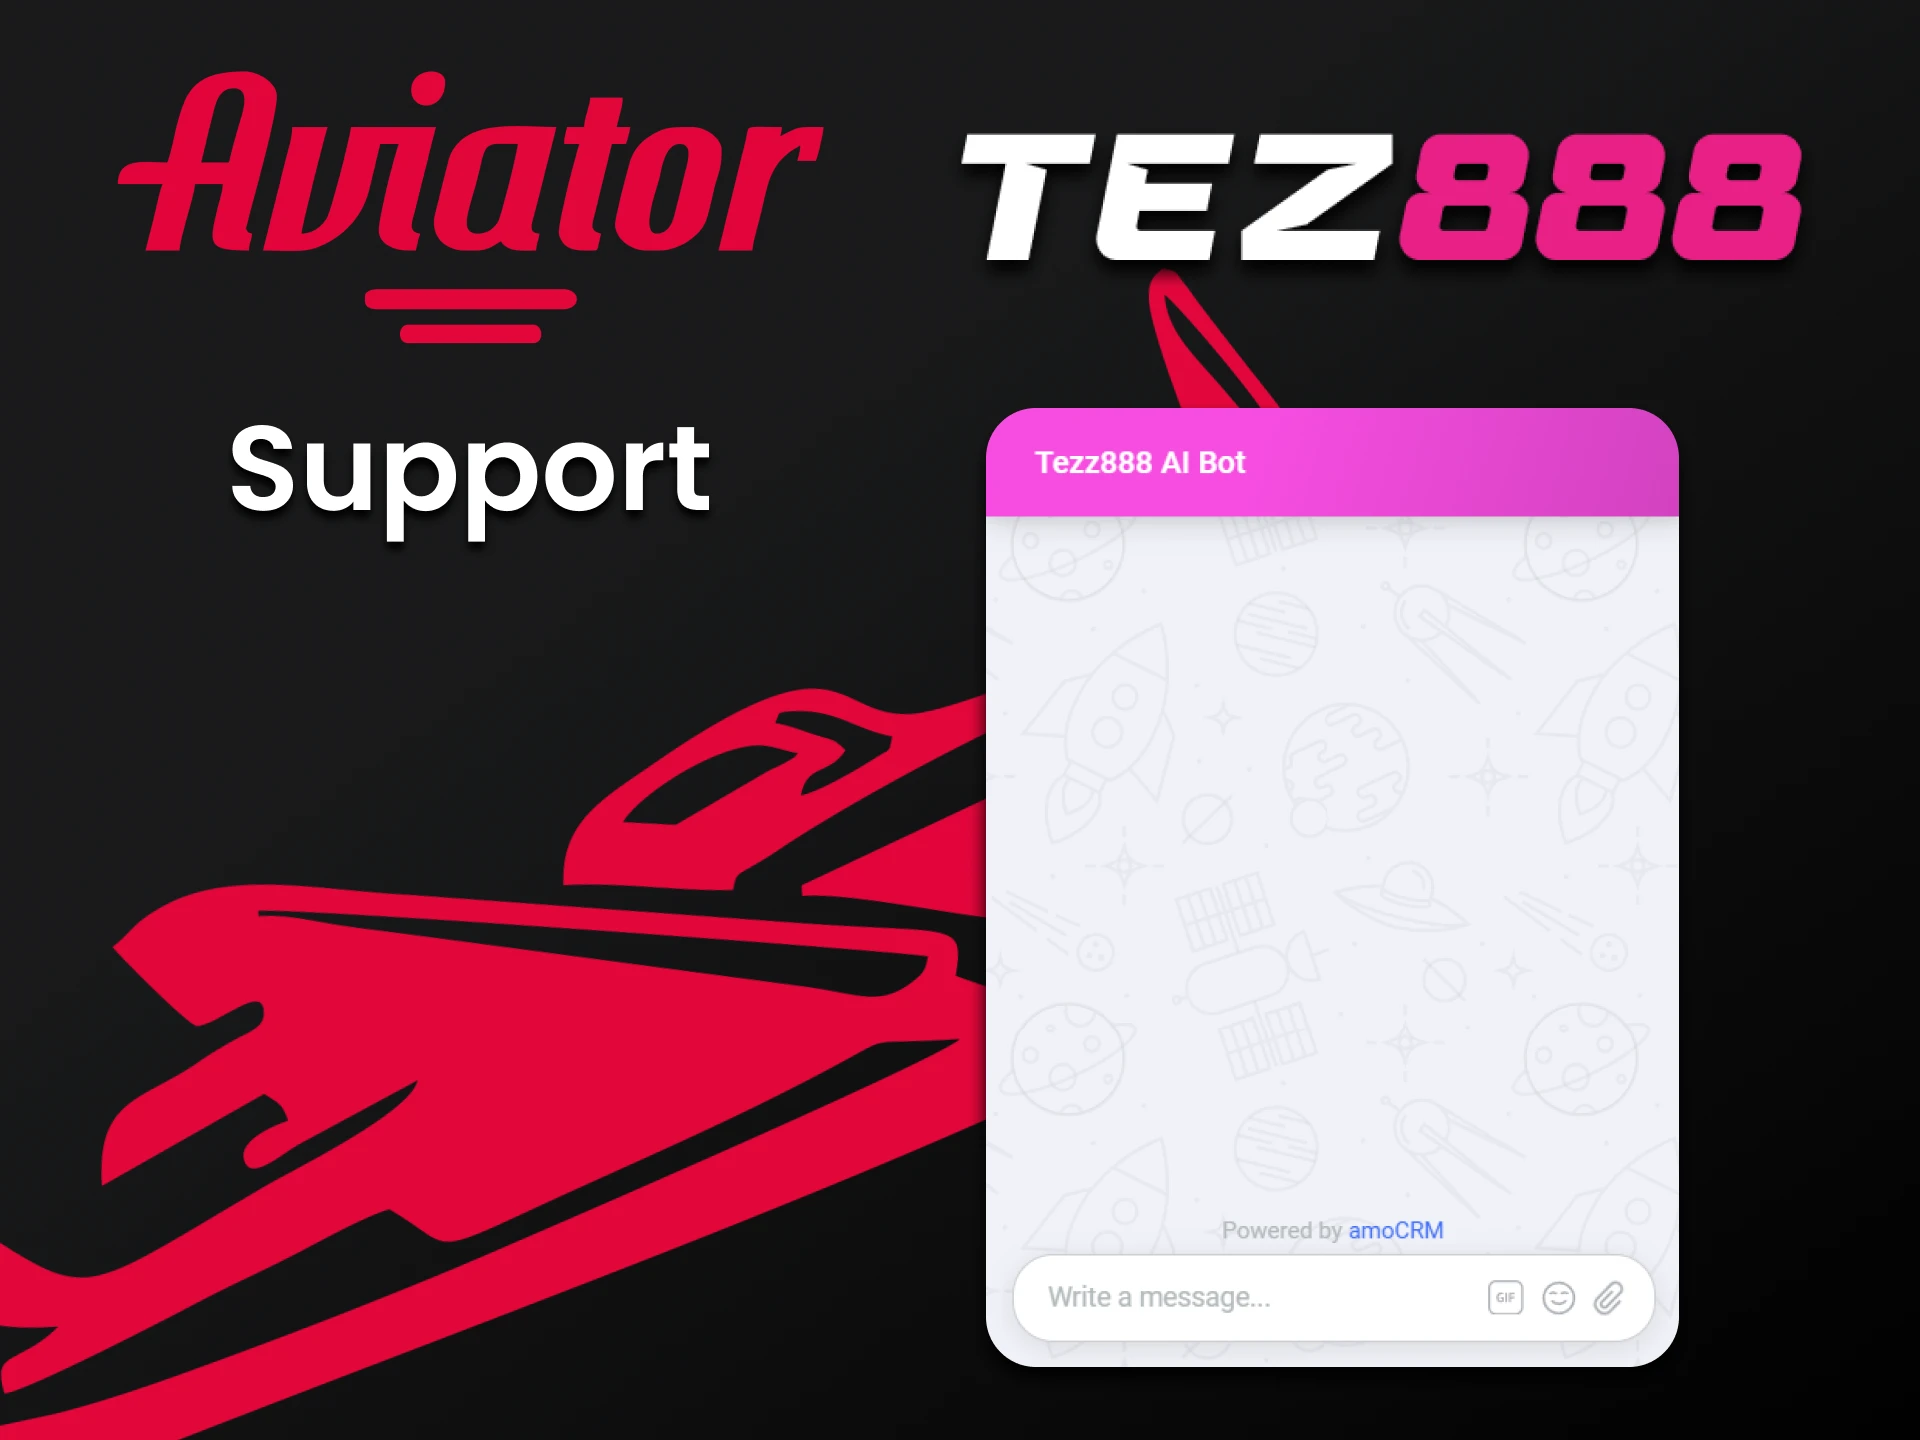 We will show you how to contact the Tez888 team for the Aviator game.